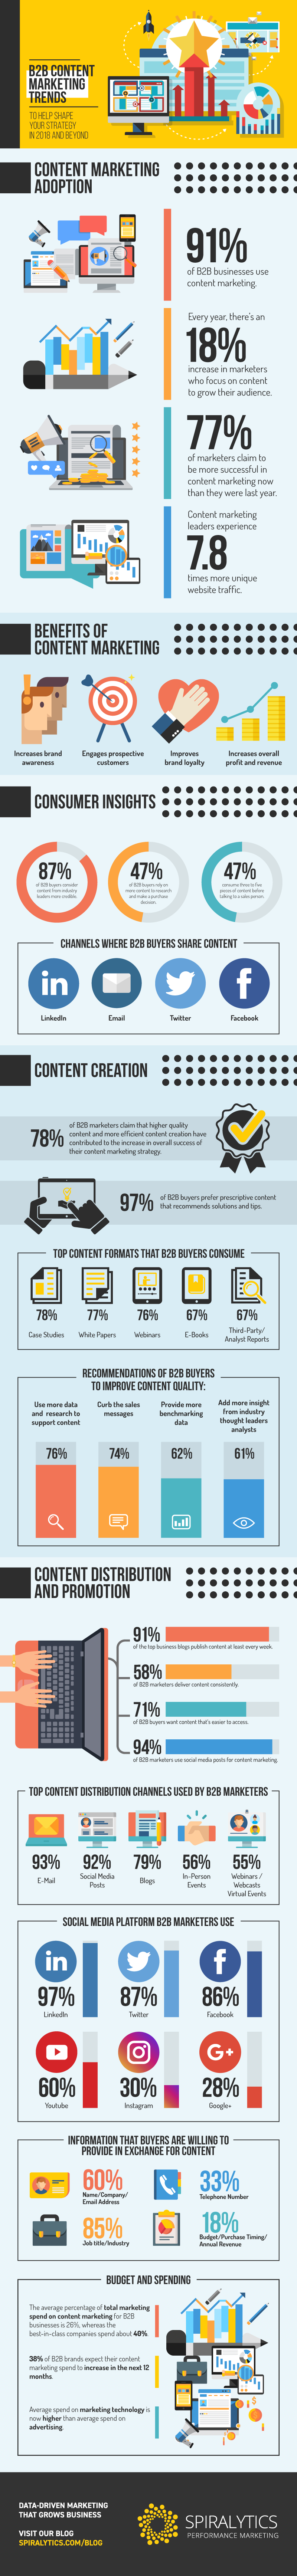 B2B Content Marketing Trends to Shape Your Strategy in 2018 and Beyond - #infographic